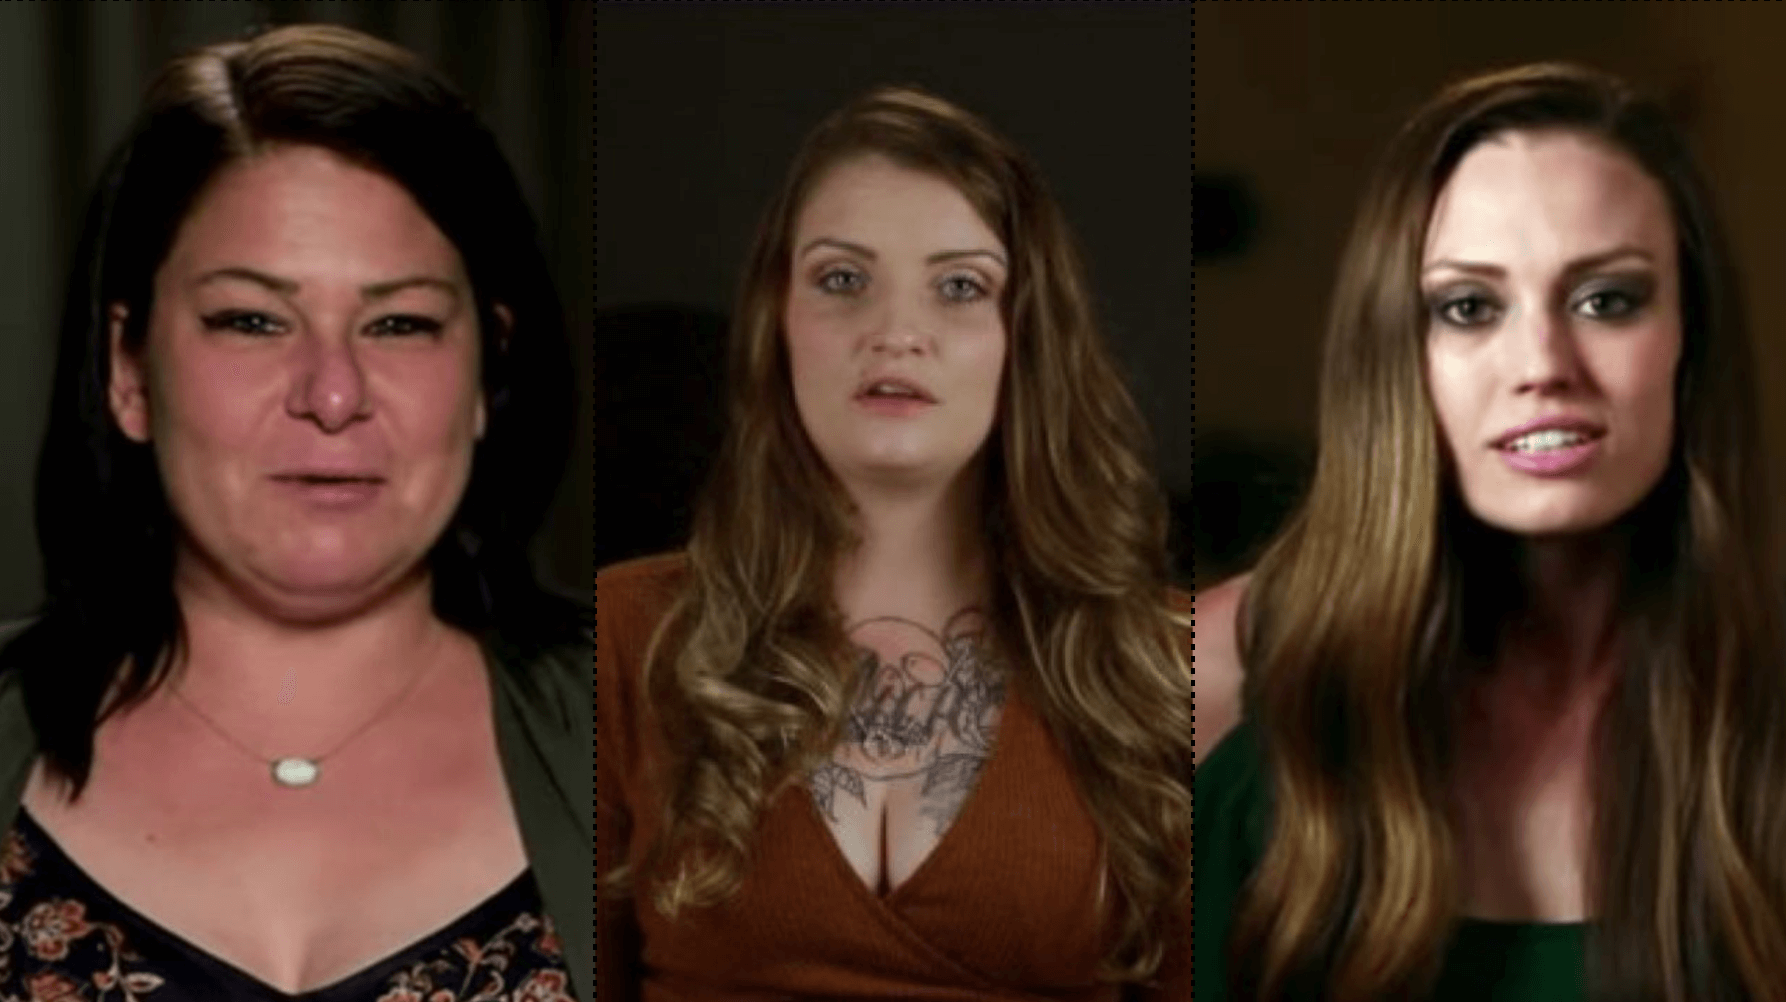 Spoiler Alert 3 Of The 4 Female Ex Cons From 'Life After Lockup' ...